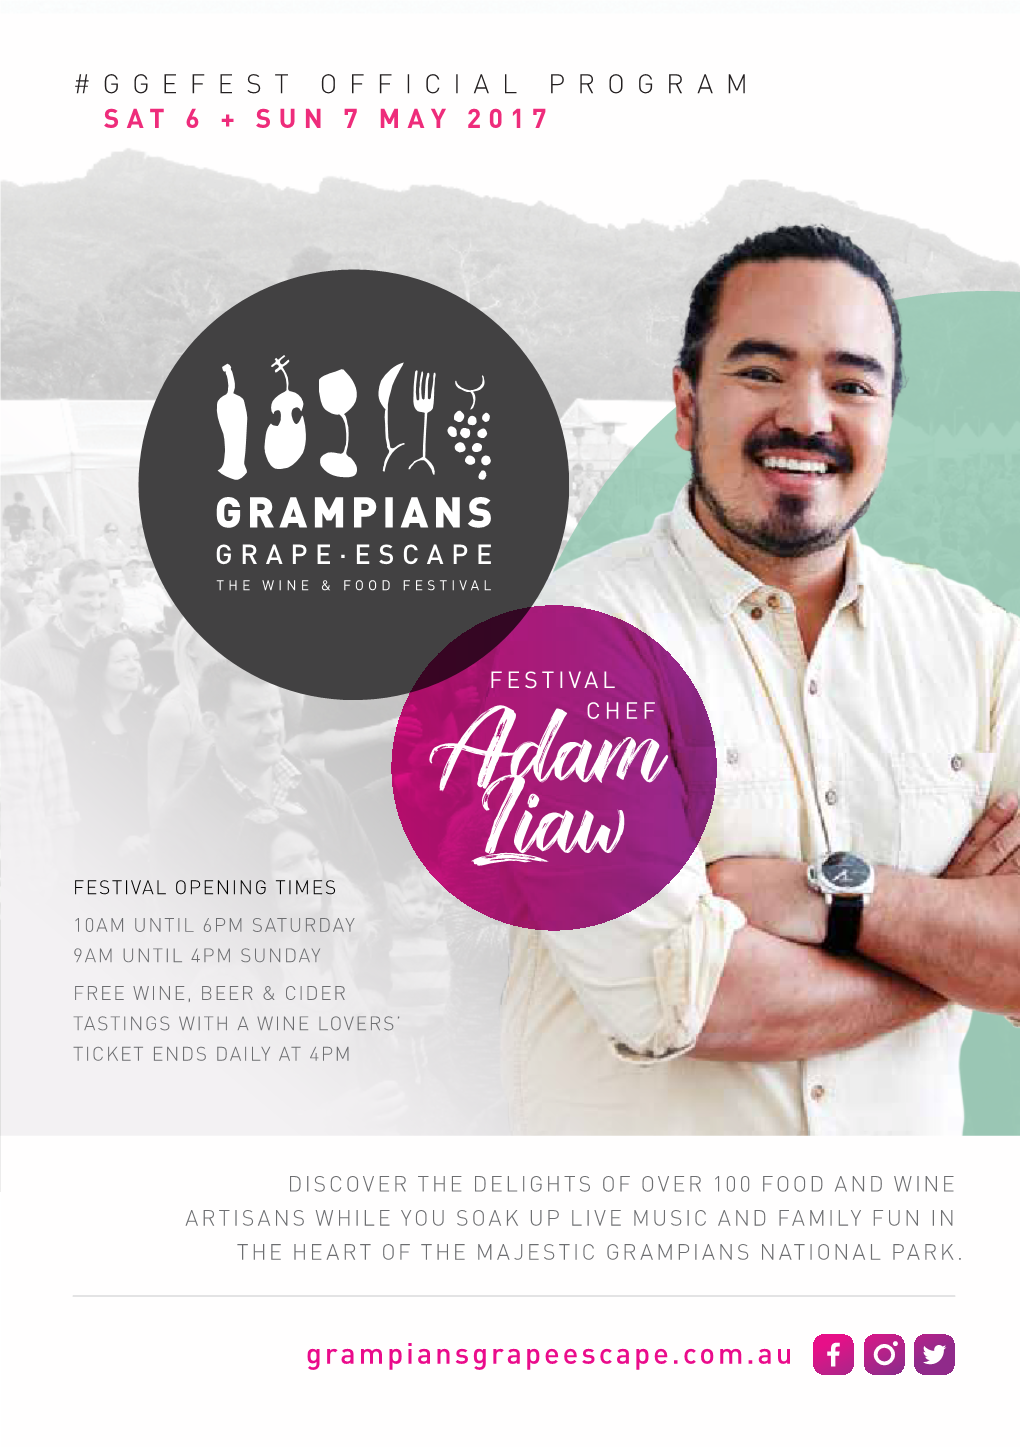 Adam Liaw Cooking Demonstration 3 Cake (MM) Until 12.00 This Weekend’S Integral Part of Winemaking in the Region